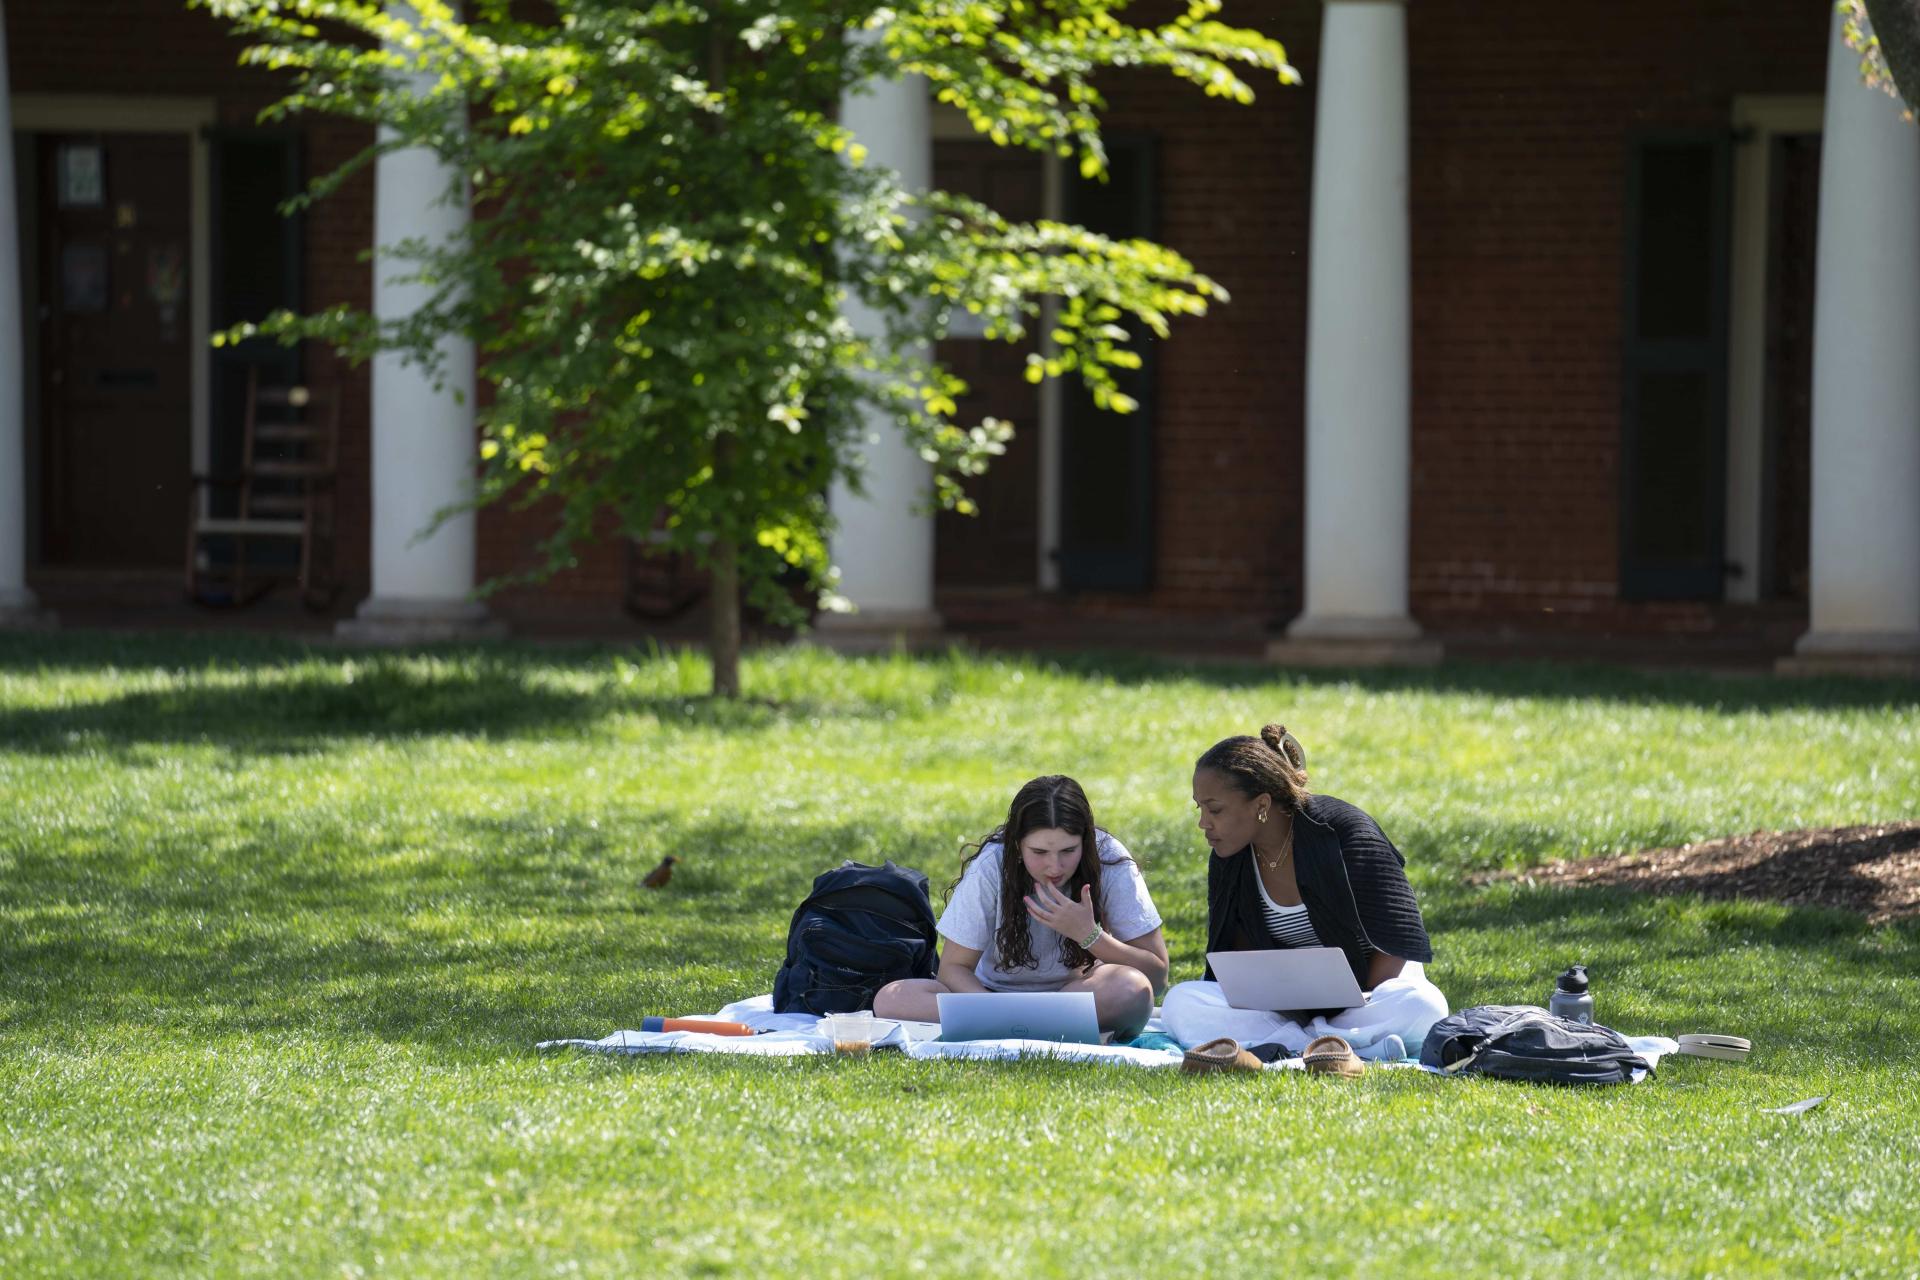 Students on the lawn